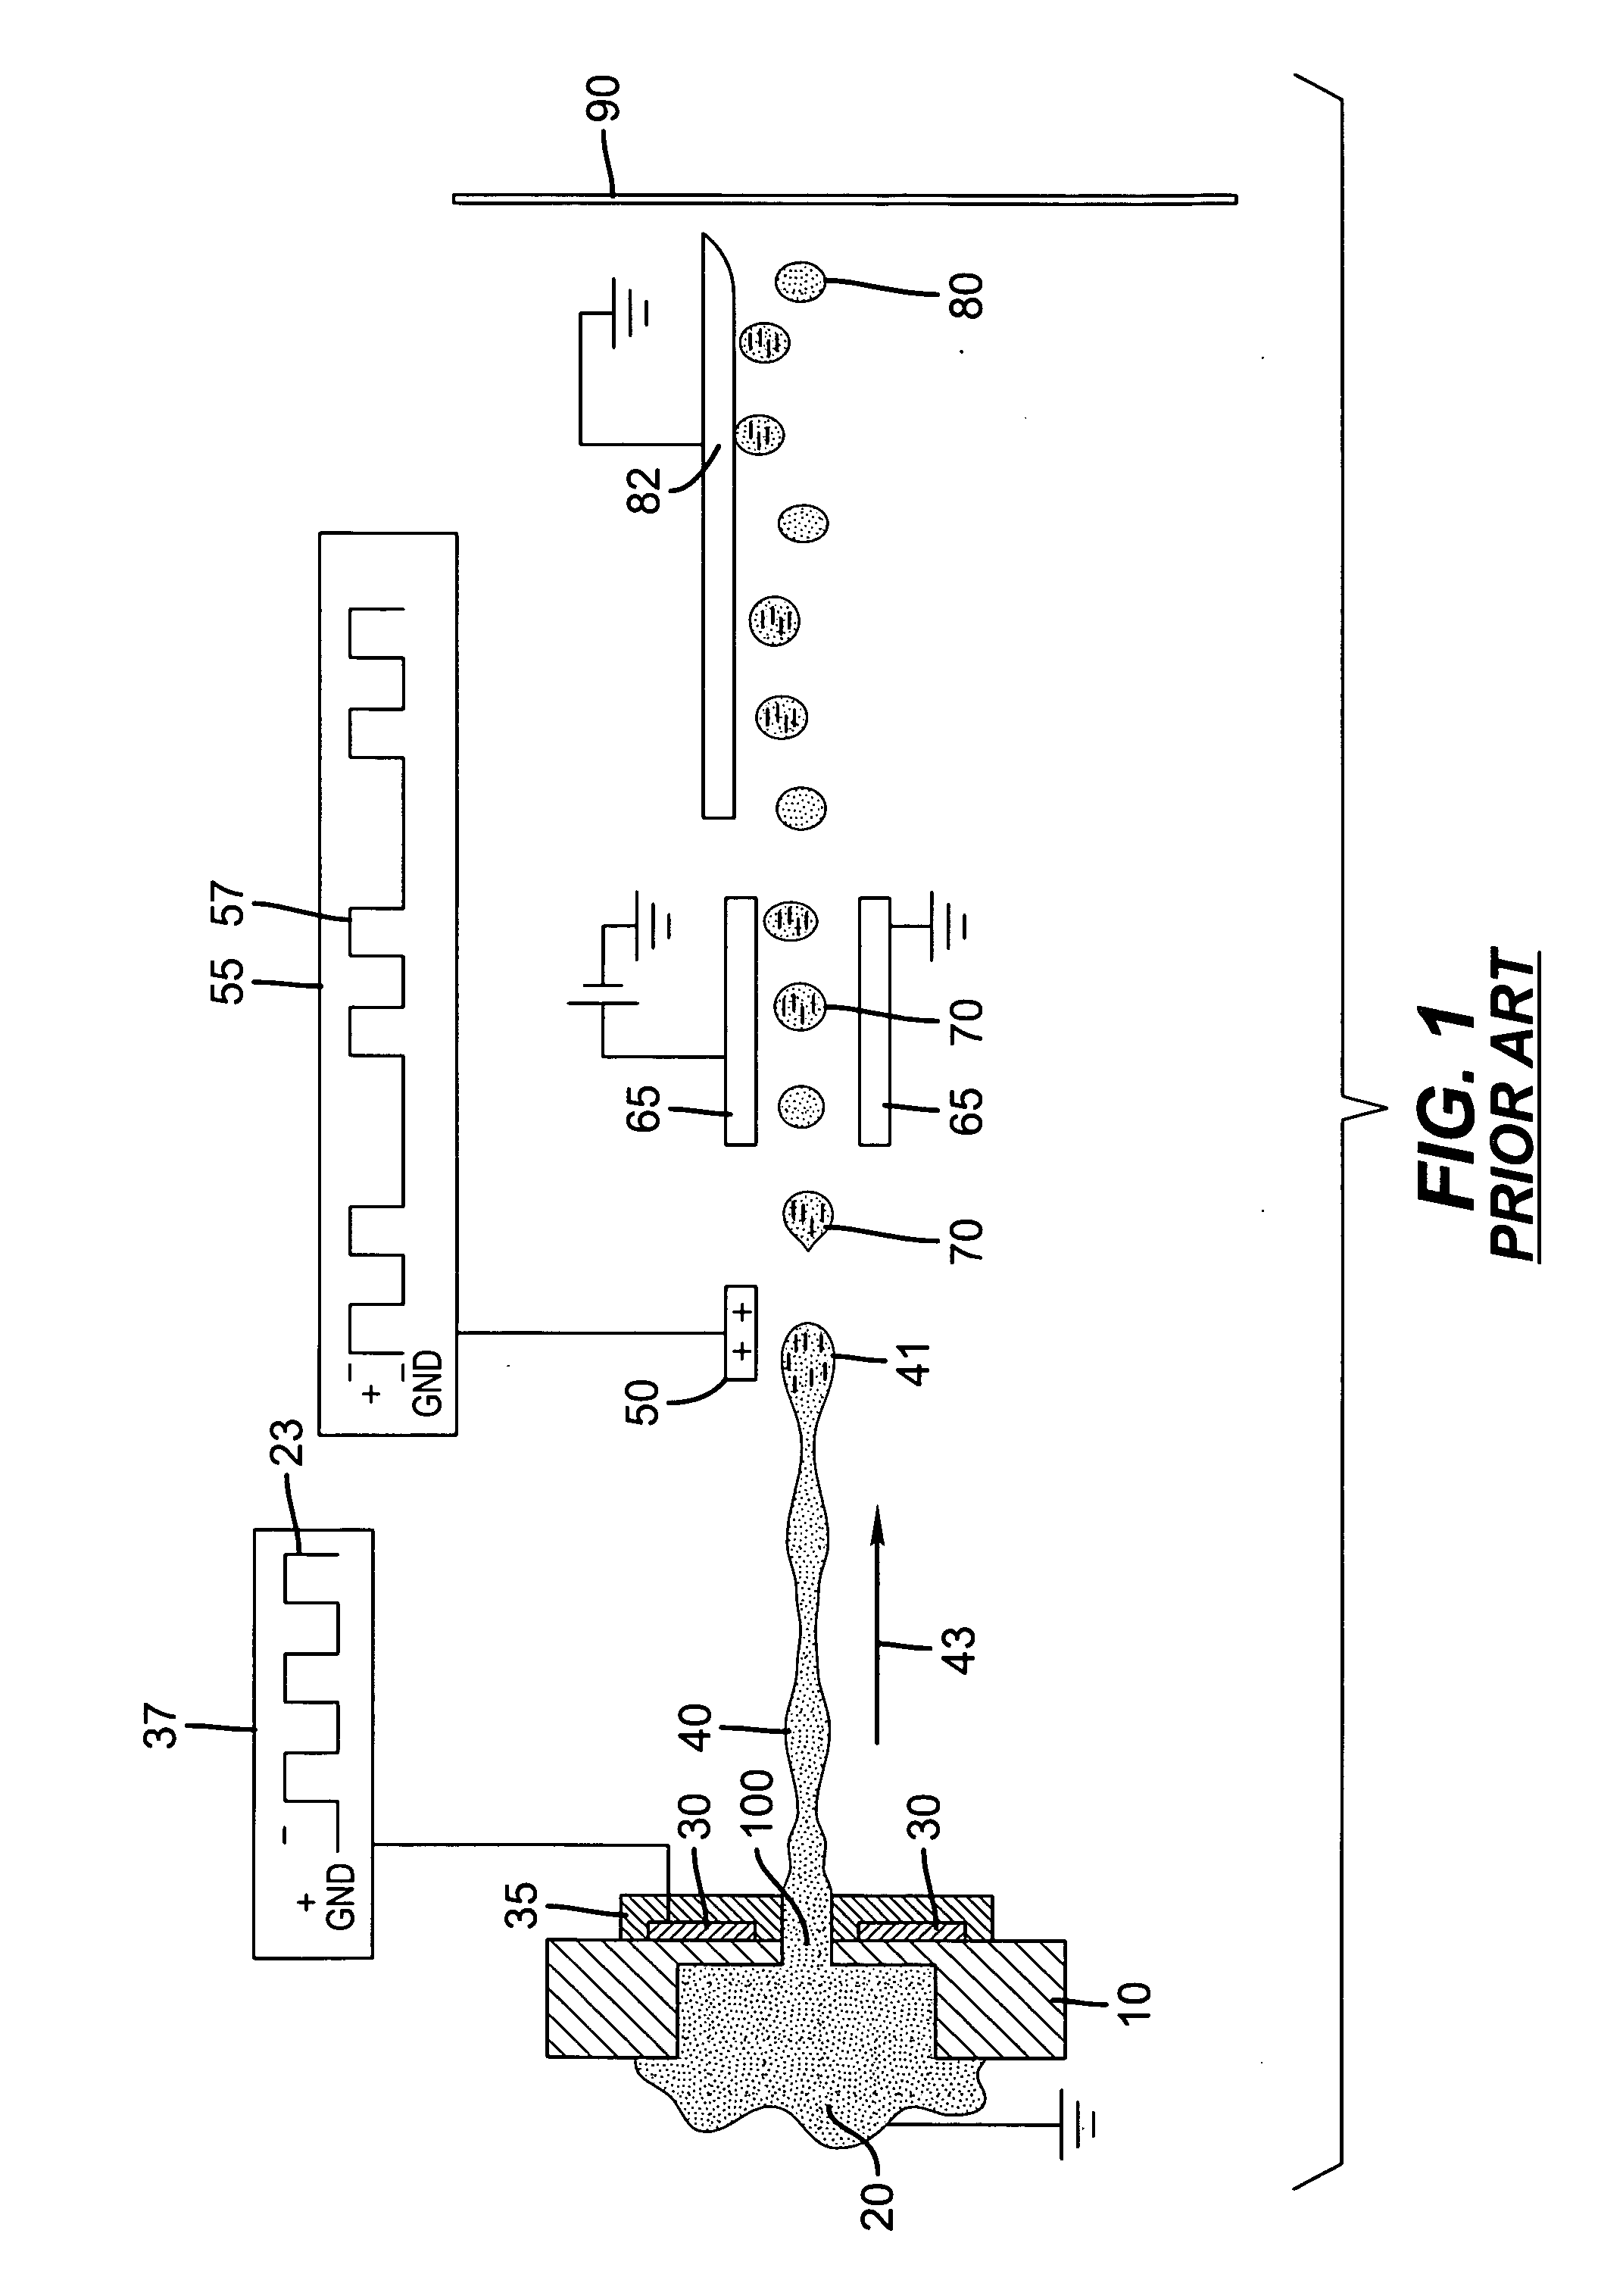 Apparatus and method for electrostatically charging fluid drops